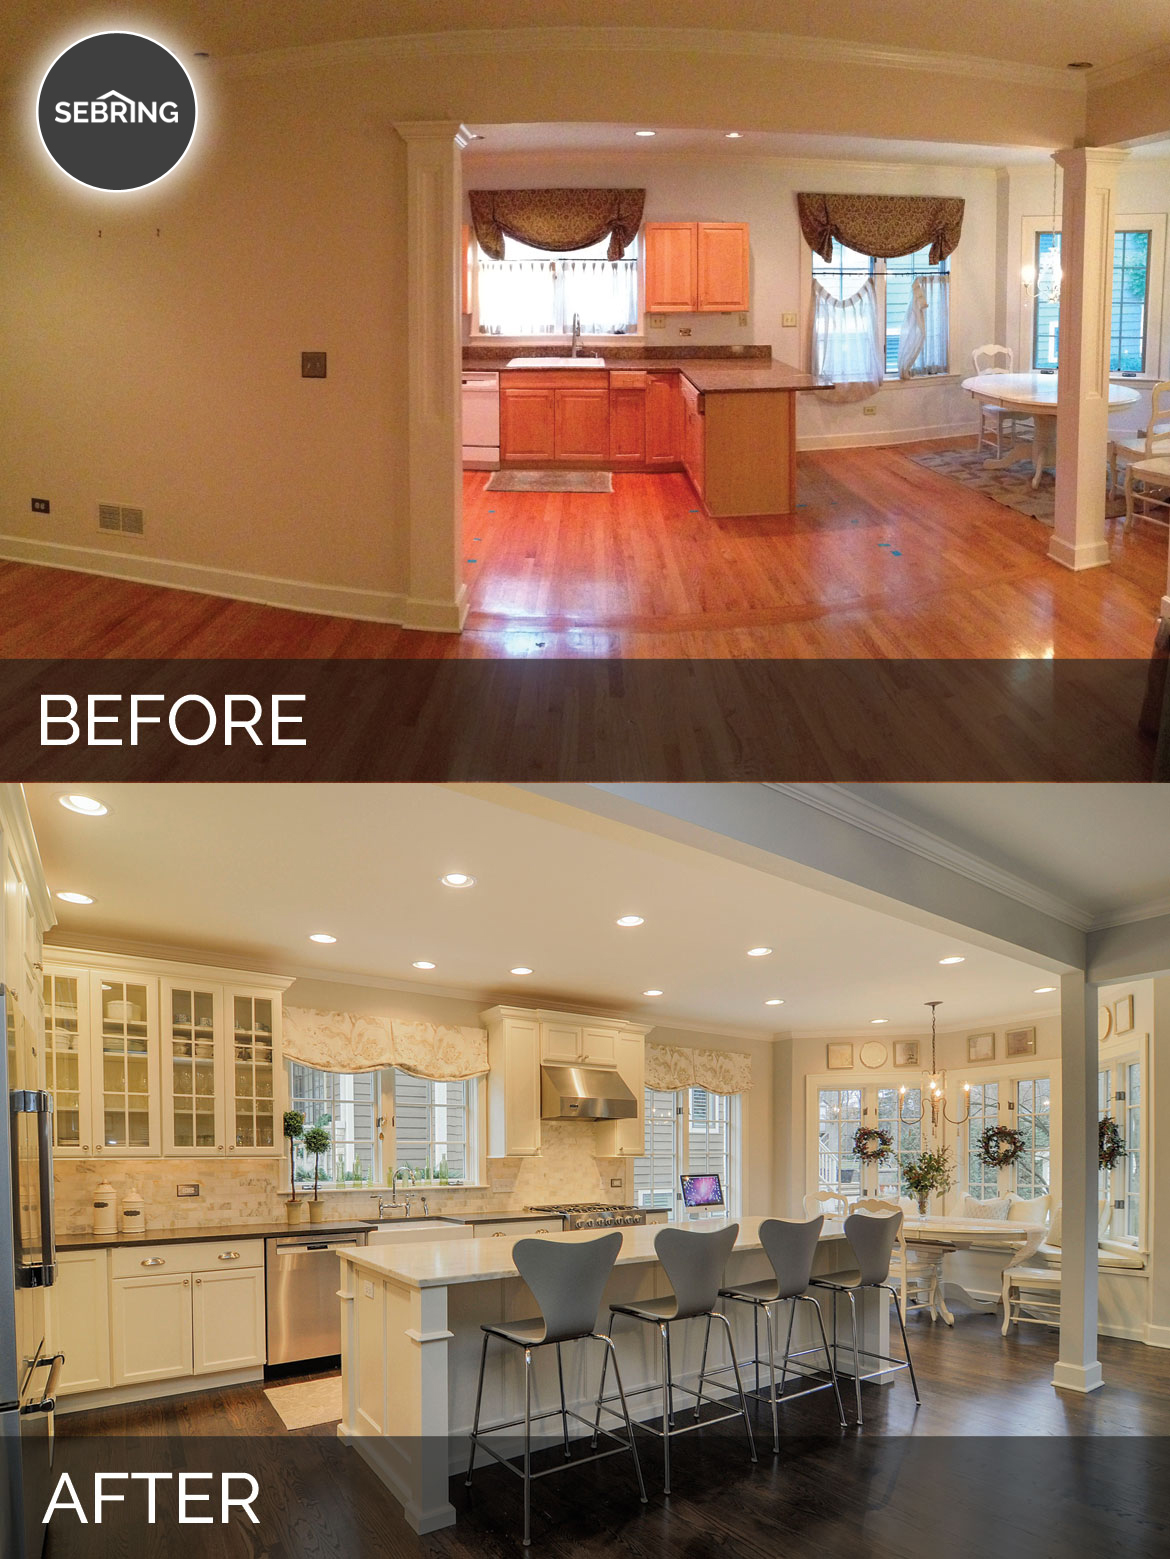 Before & After Kitchen Downers Grove - Sebring Design Build